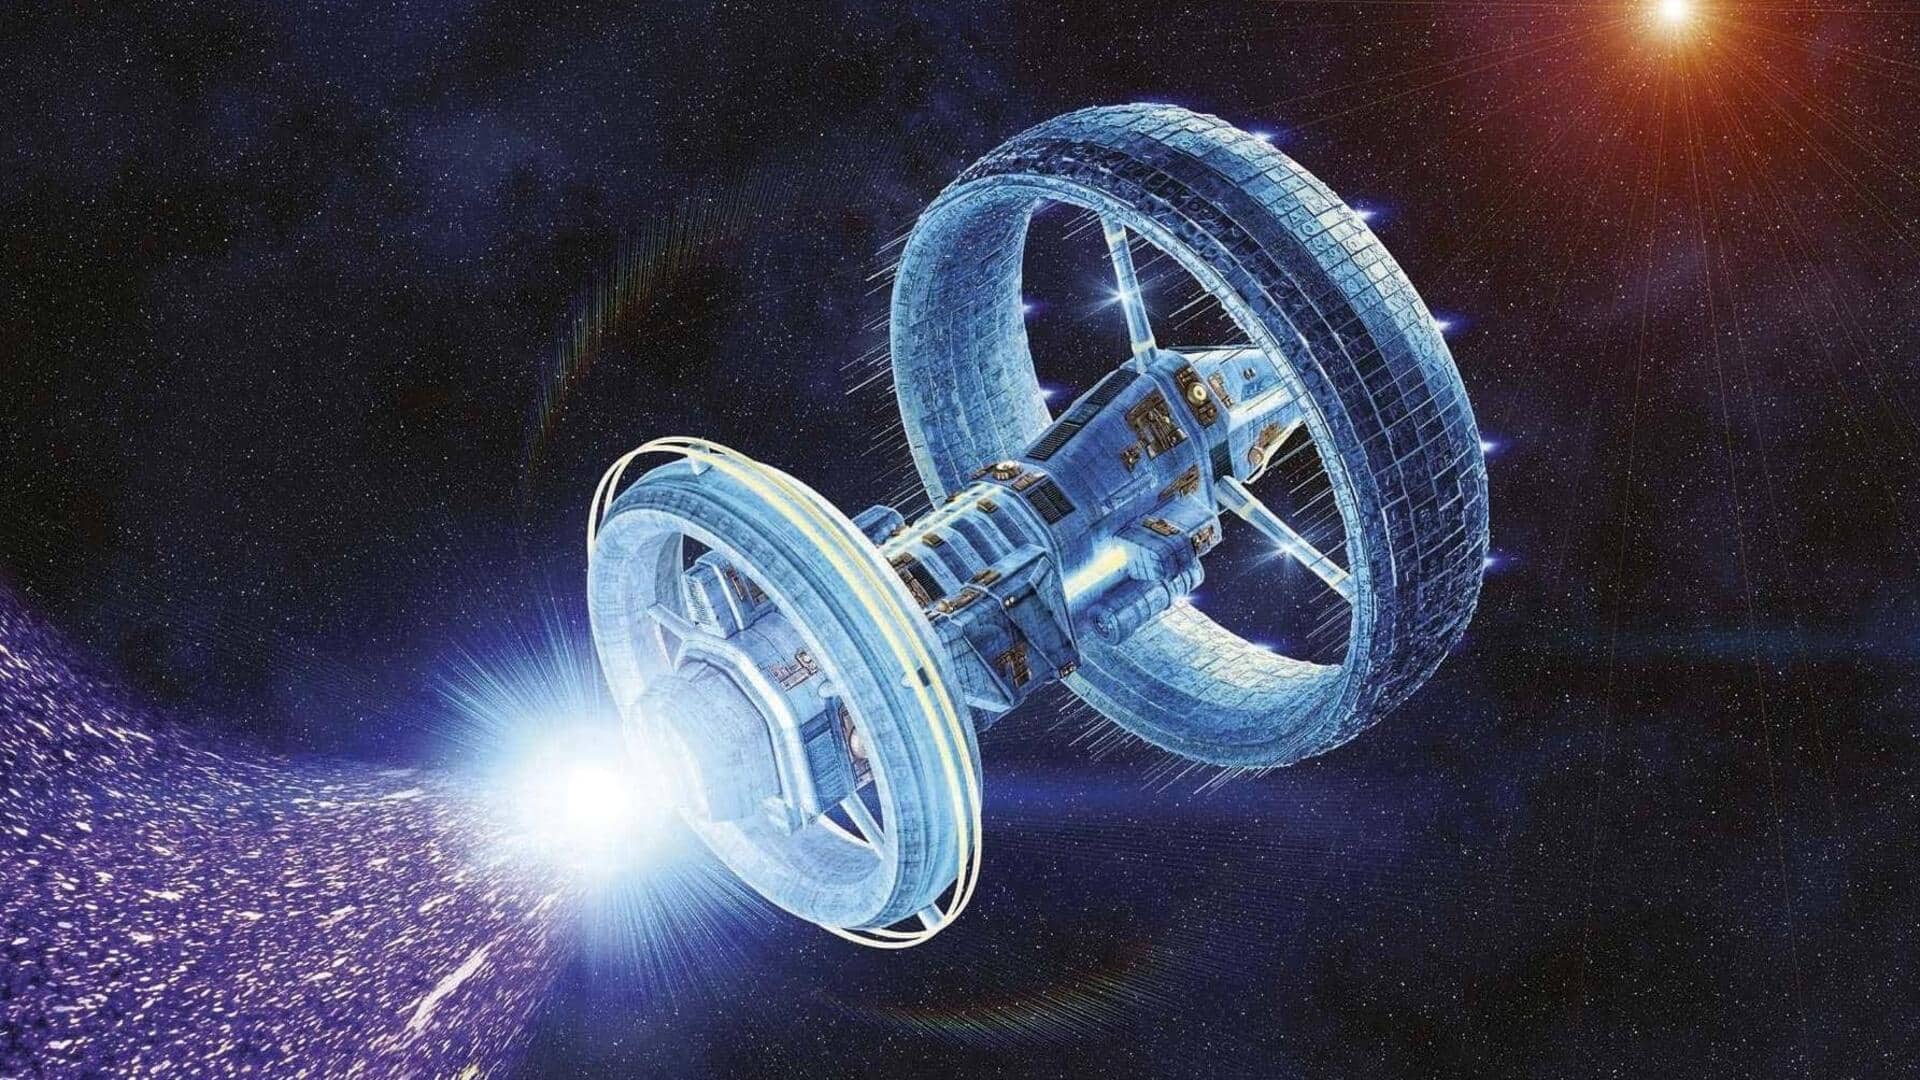 Warp drives for interstellar travel could become reality, study suggests